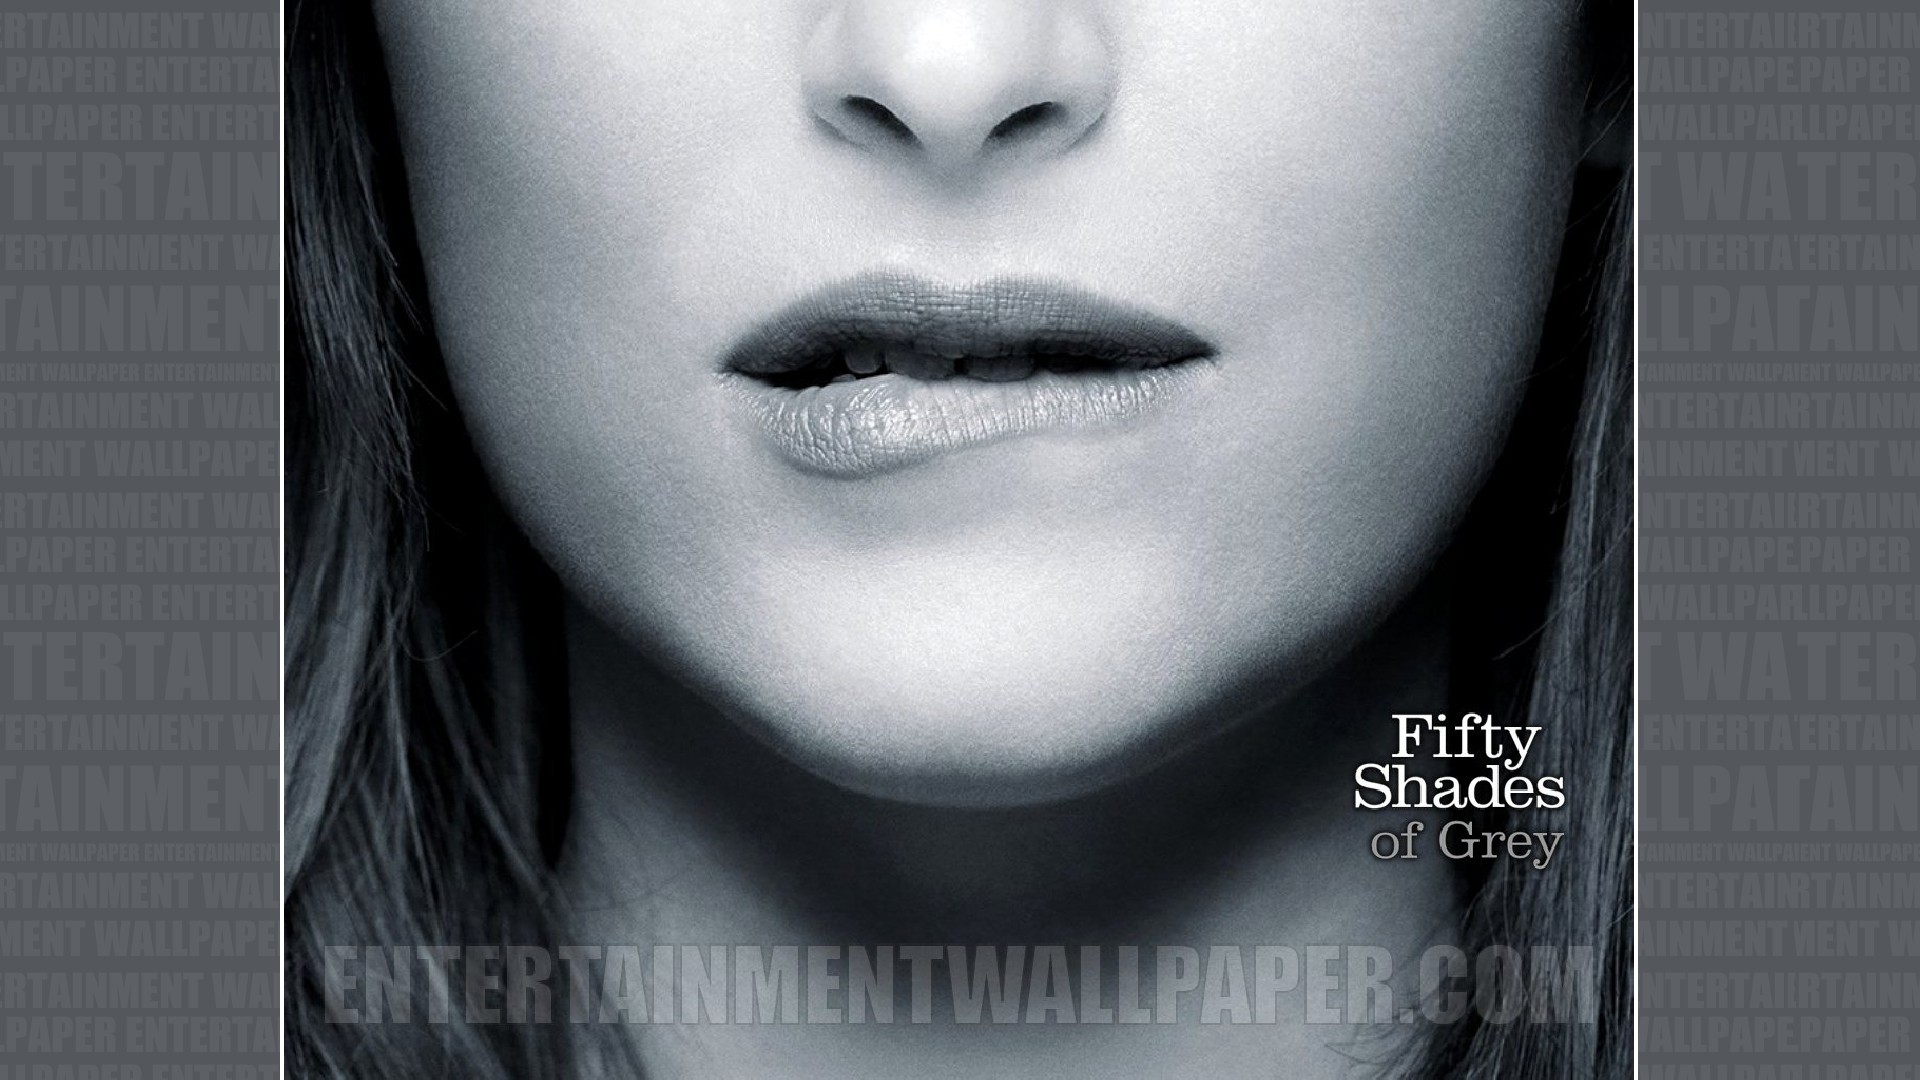 1920x1080 Fifty Shades of Grey Wallpaper - Original size, download now.